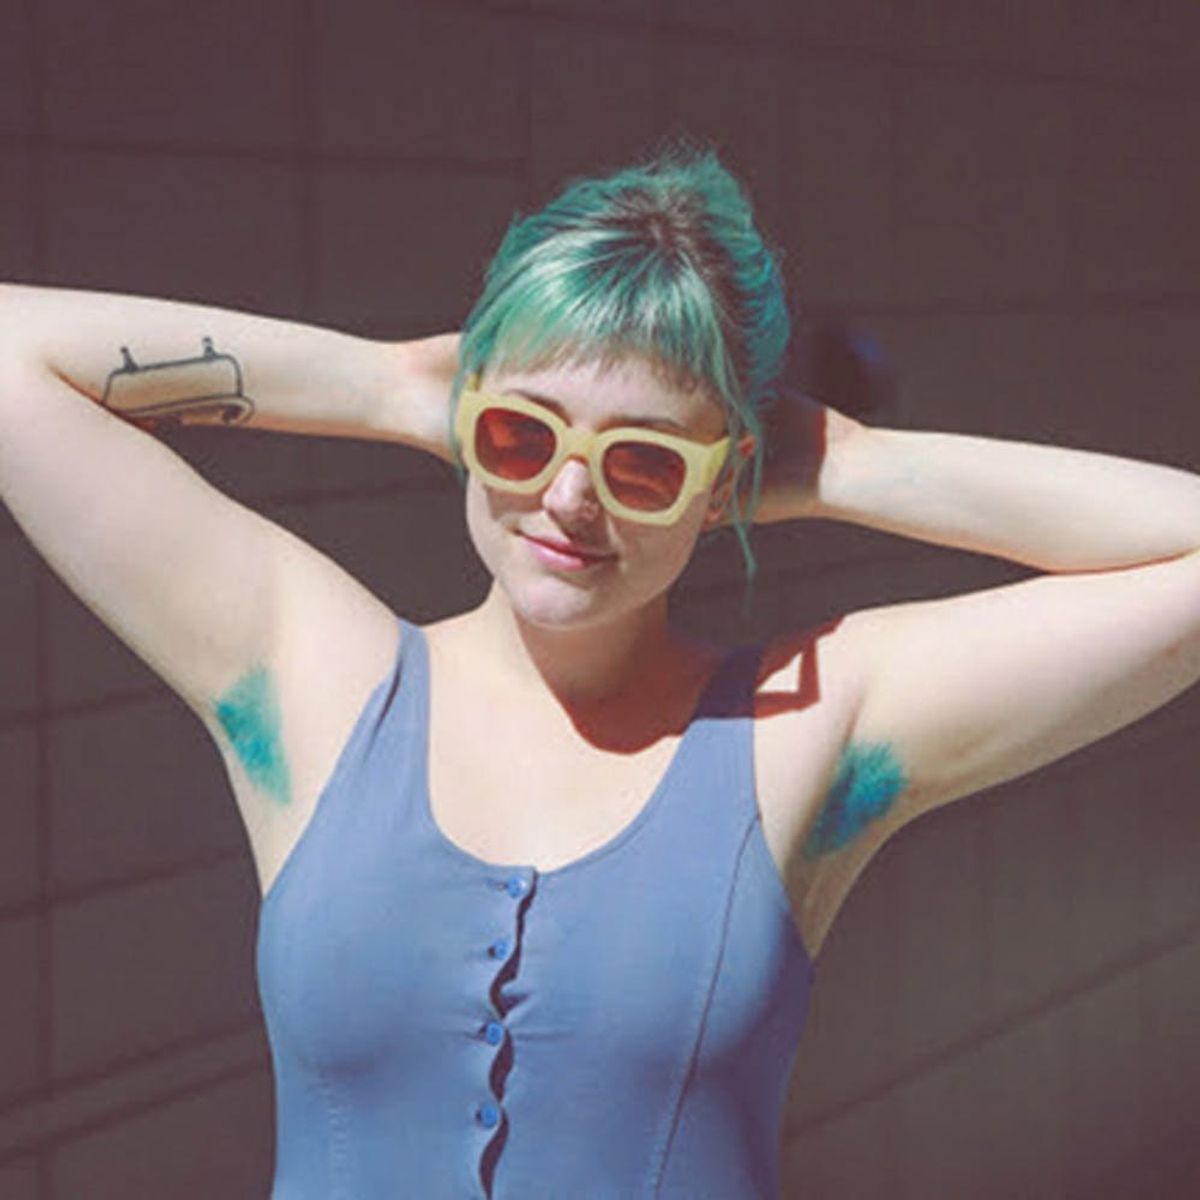 Say What?! Dyed Armpit Hair Is Trending…